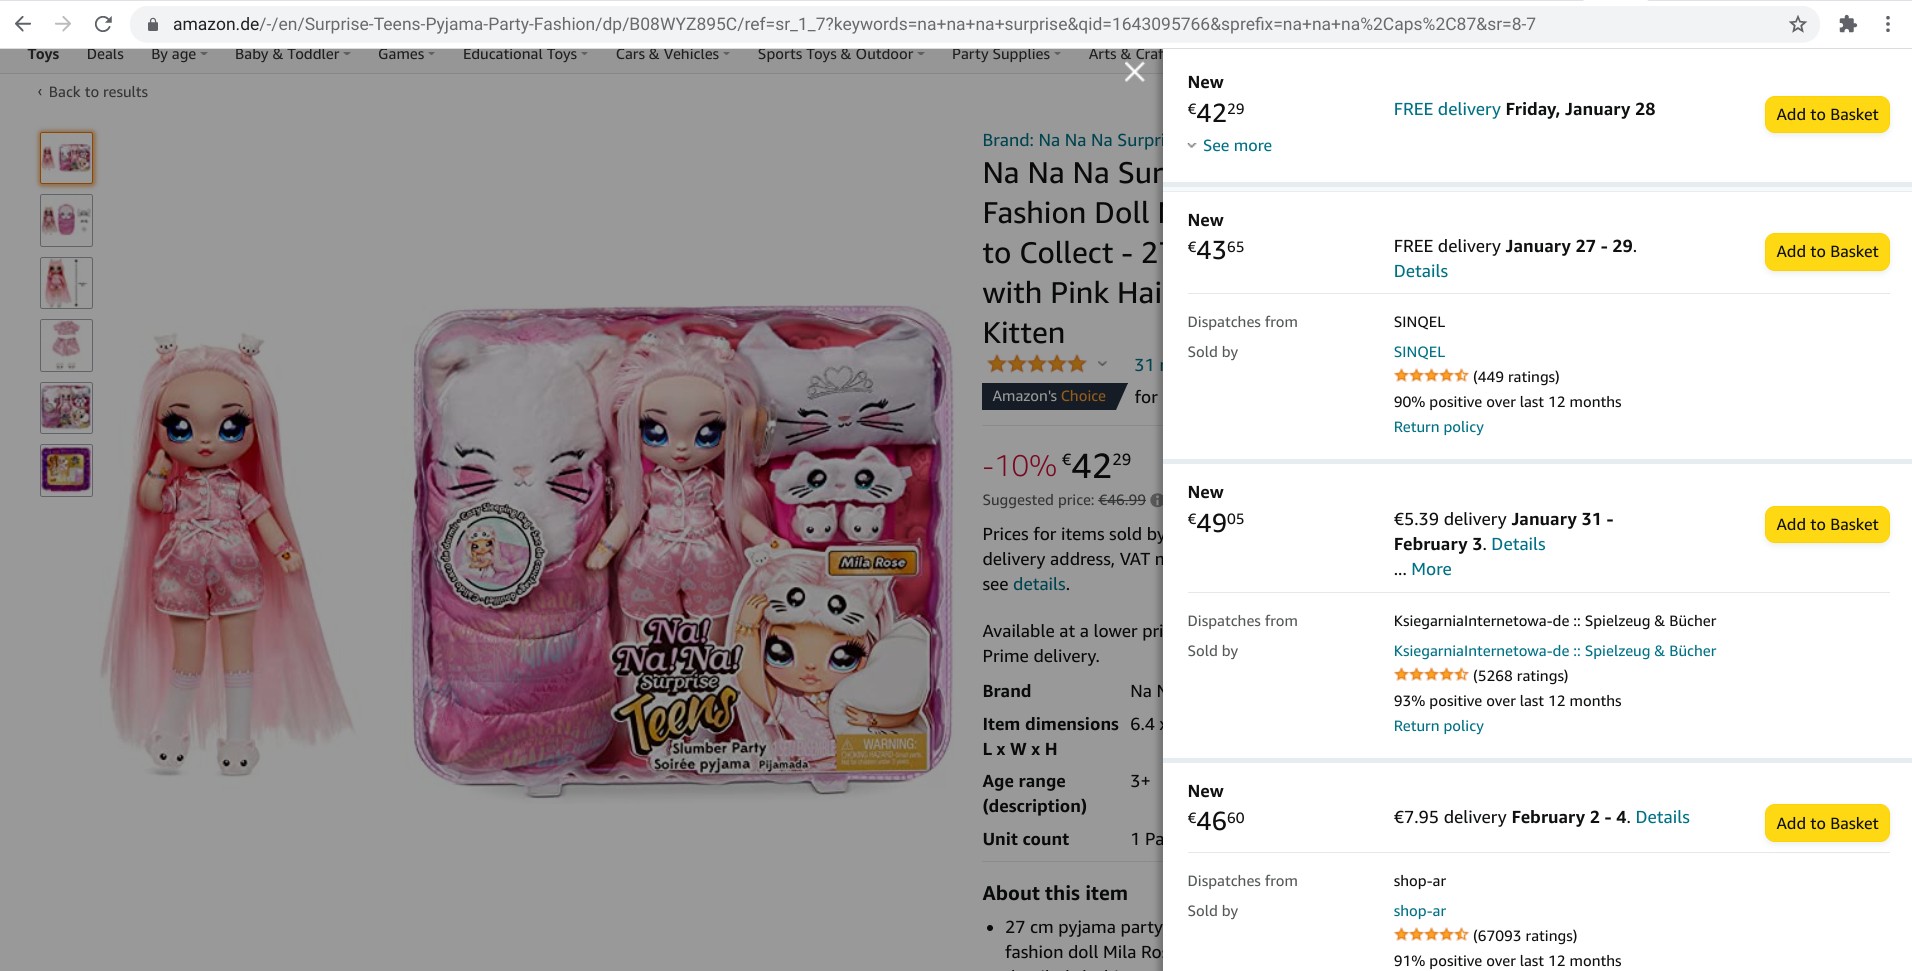 Screenshot of a product on Amazon.de with all selling options displayed